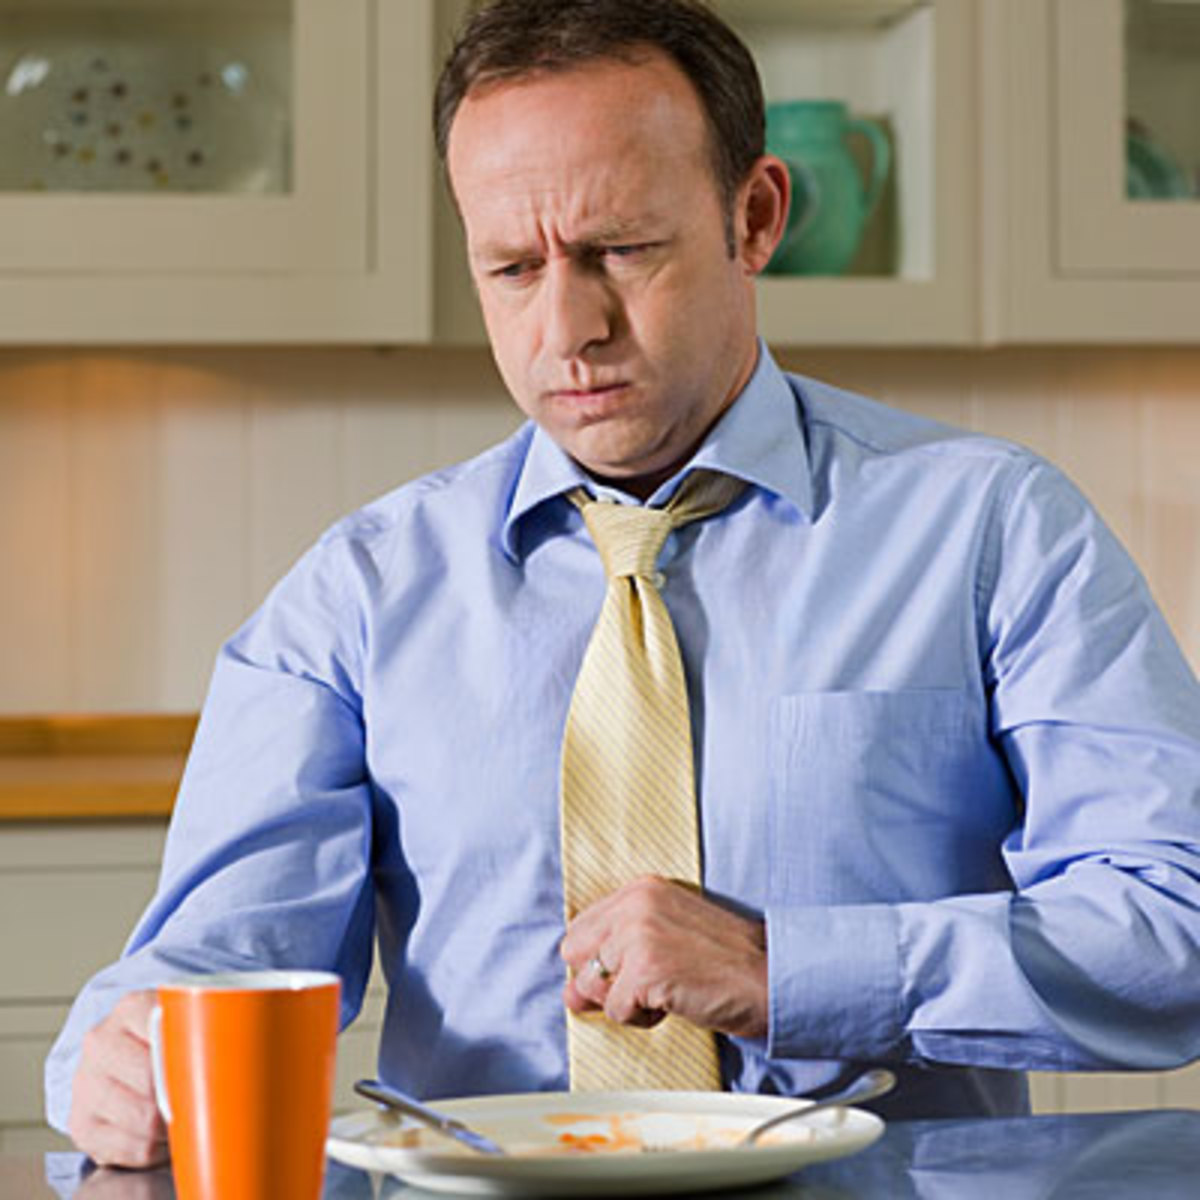 Acid Reflux Foods to Avoid: Watch What You Eat.